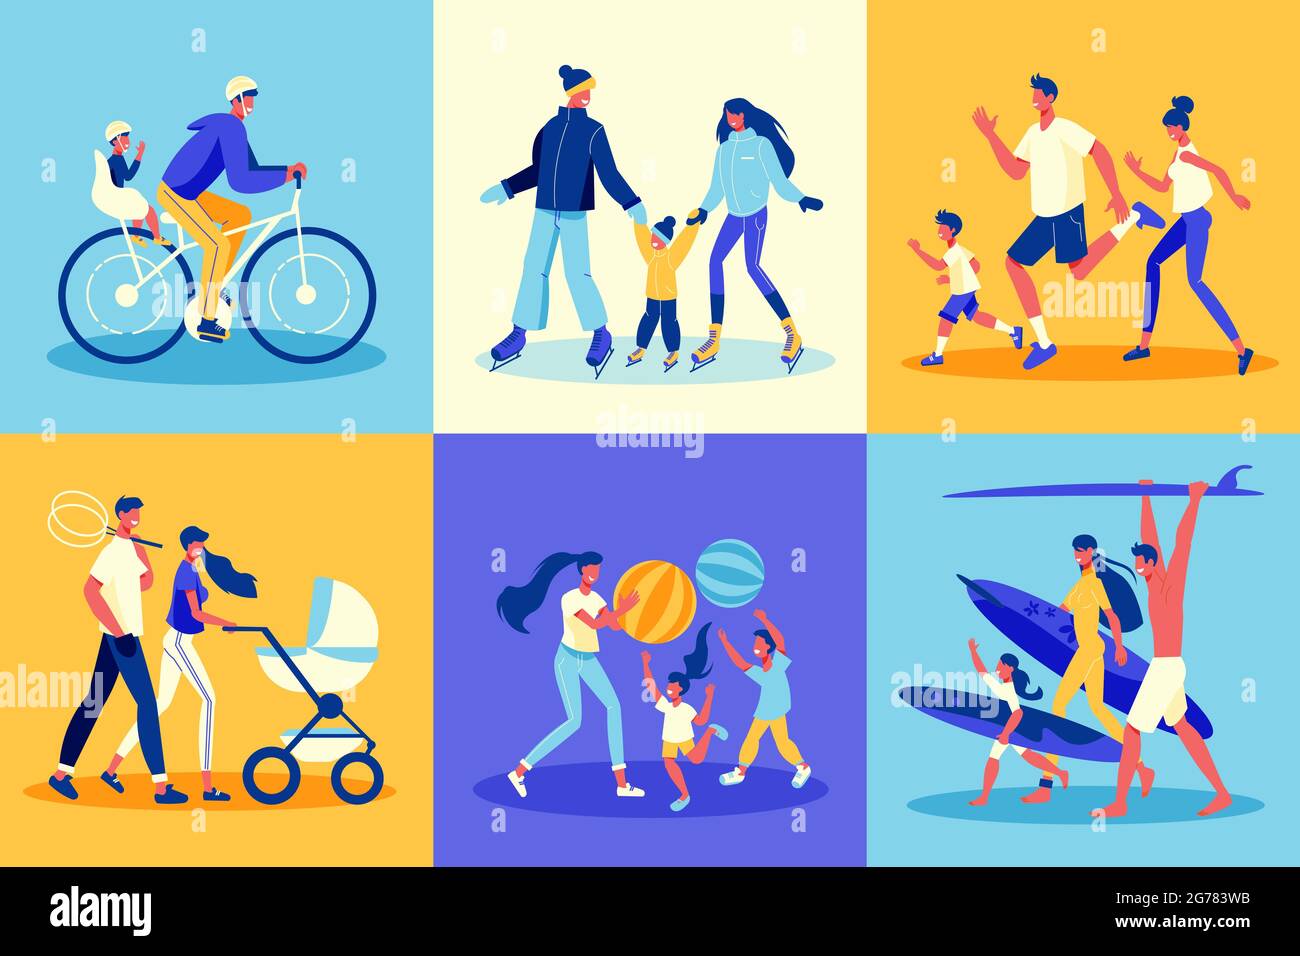 Family active holidays design concept with human characters of children ...